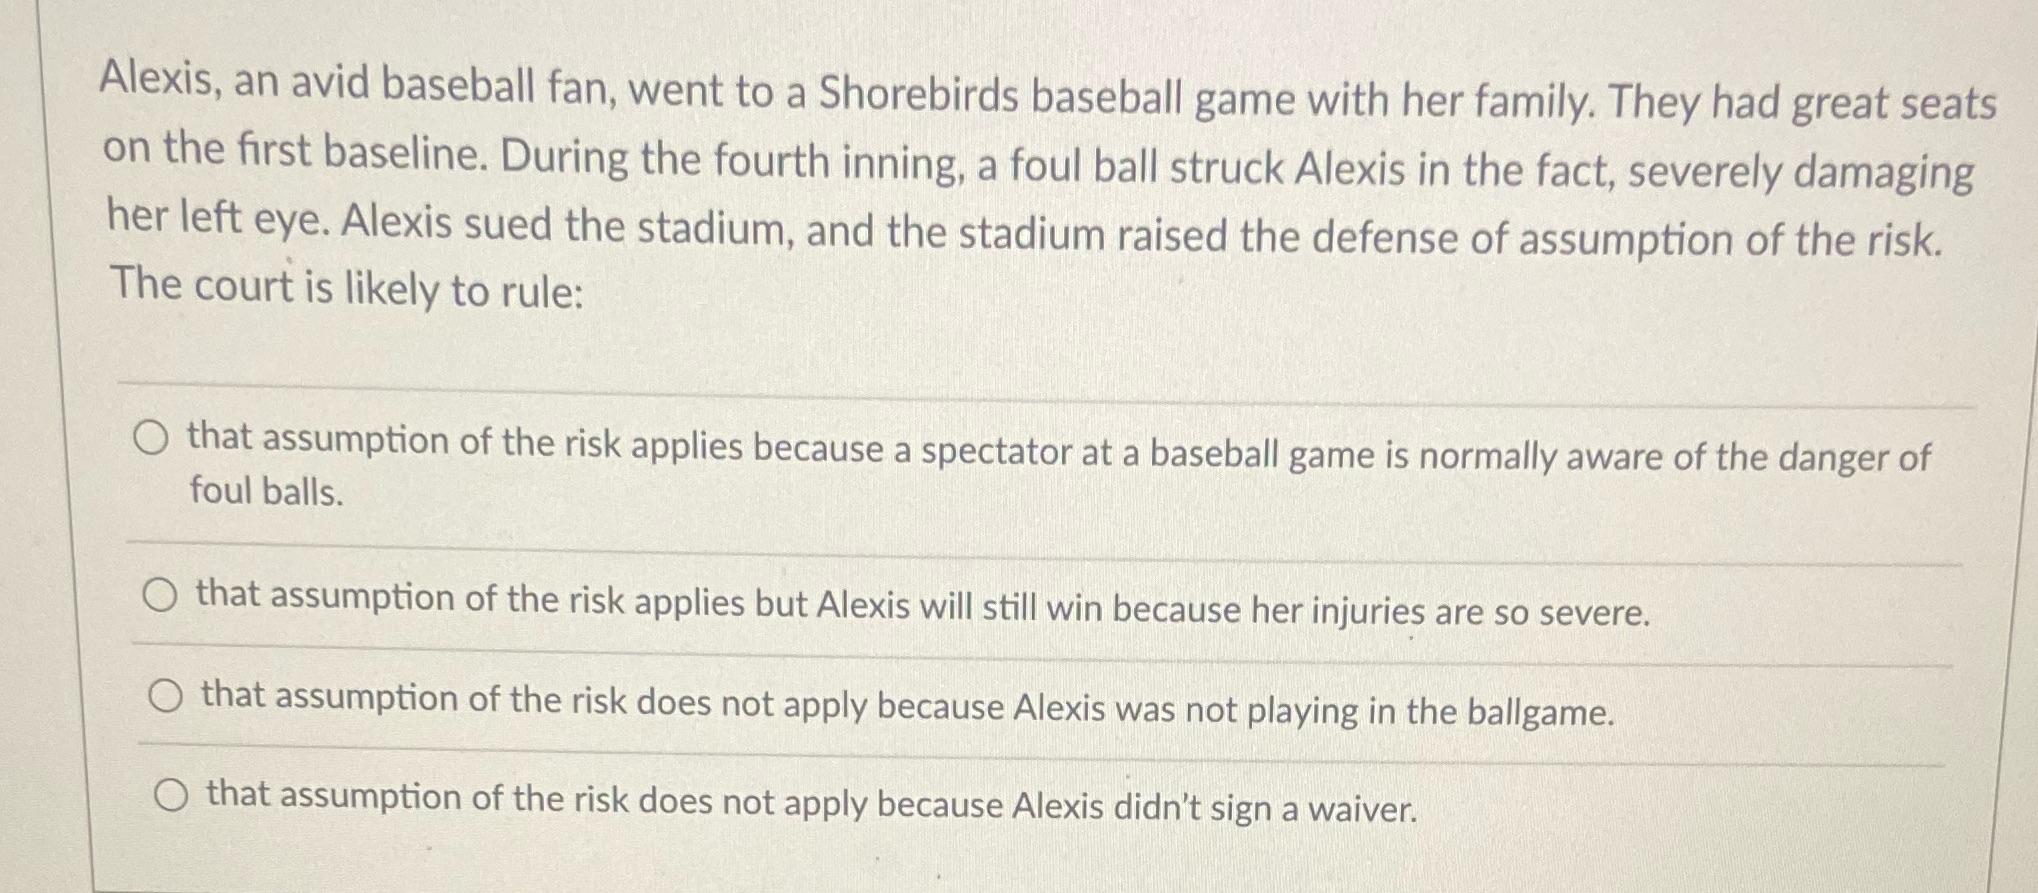 Alexis, an avid baseball fan, went to a Shorebirds baseball game with her family. They had great seats on the